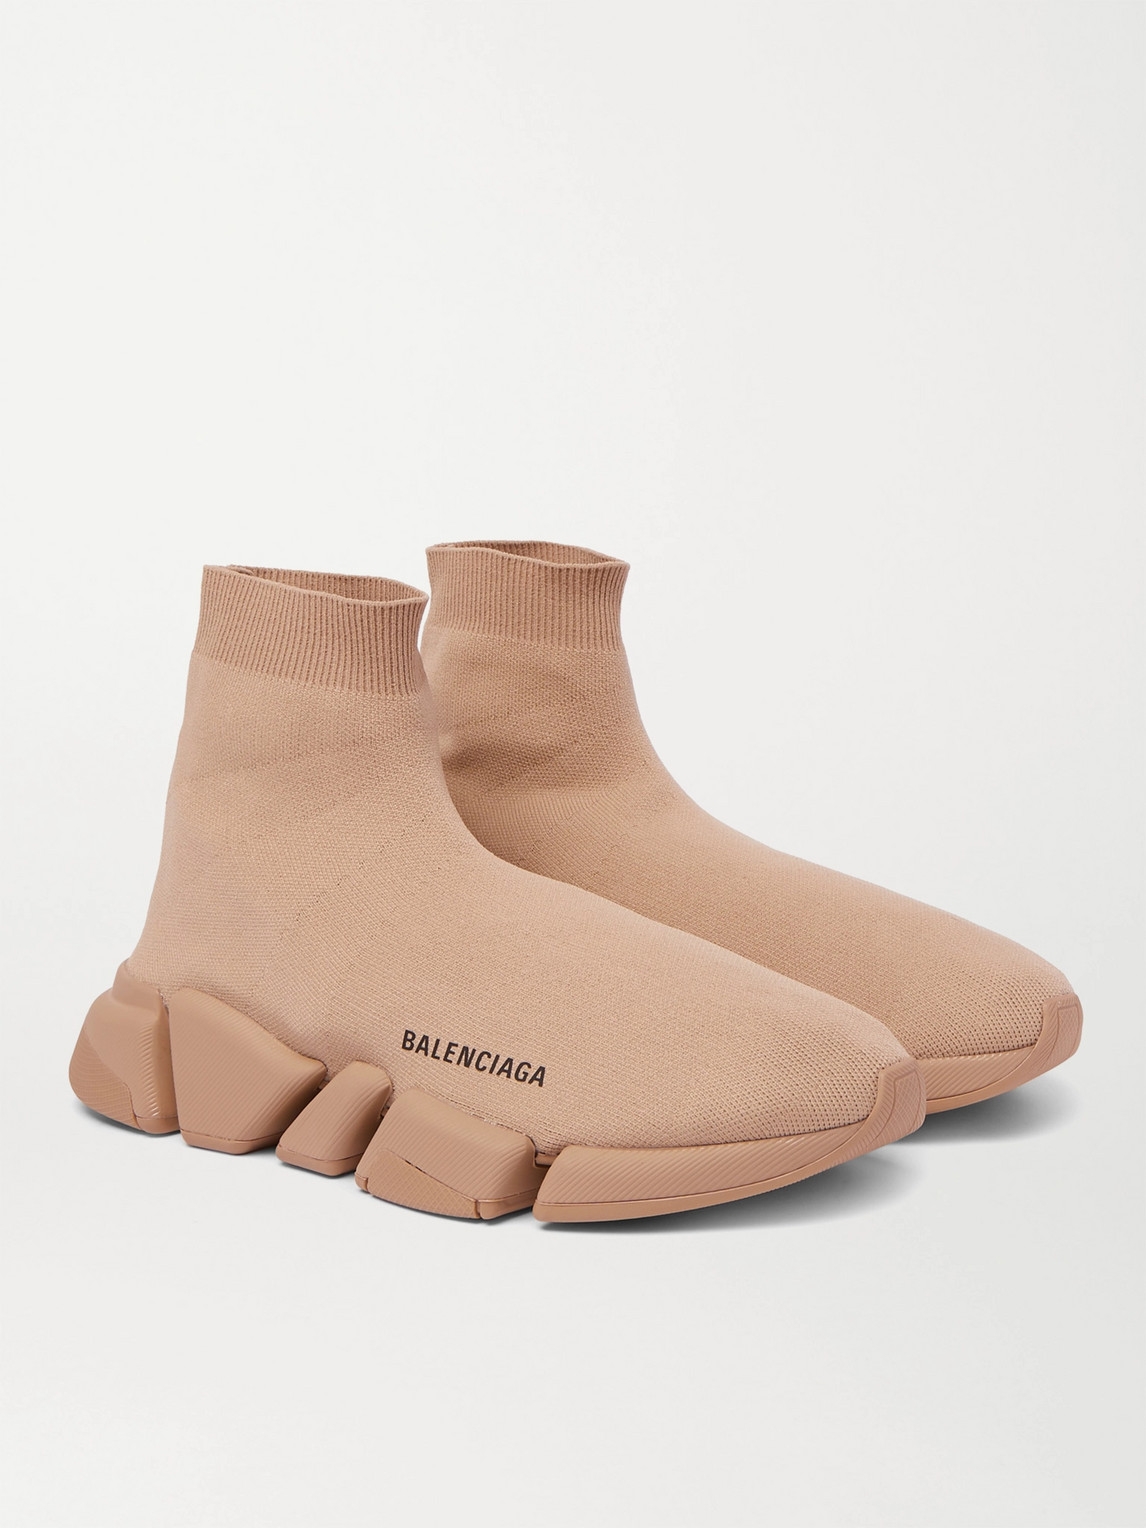 Winst Burger Rimpels Balenciaga Beige Recycled Knit Speed 2.0 Trainers In Neutrals | ModeSens